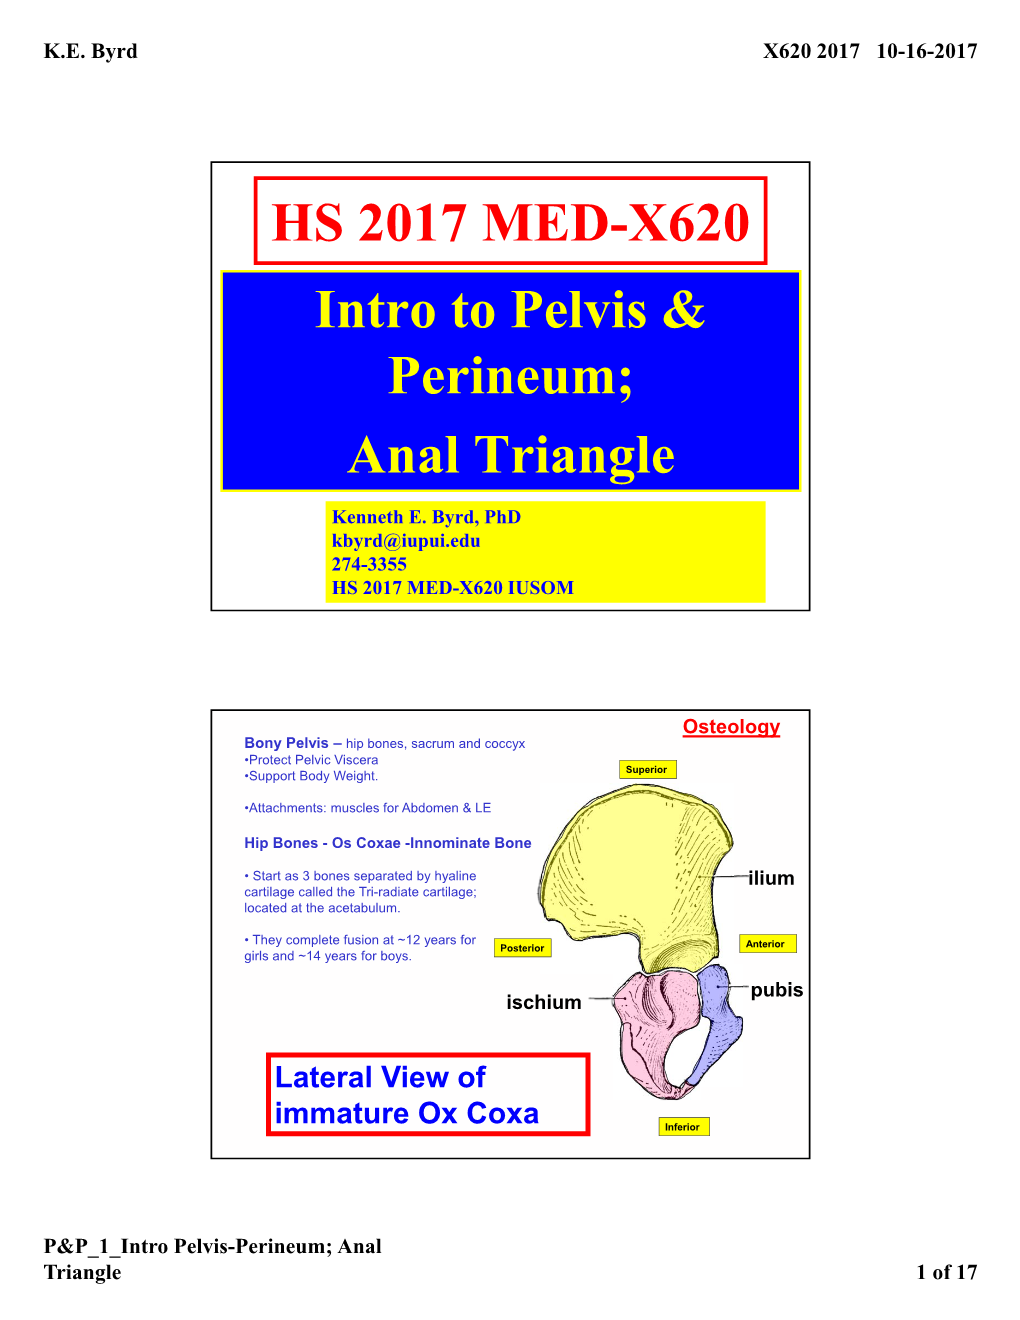 HS 2017 MED-X620 Intro to Pelvis & Perineum; Anal Triangle